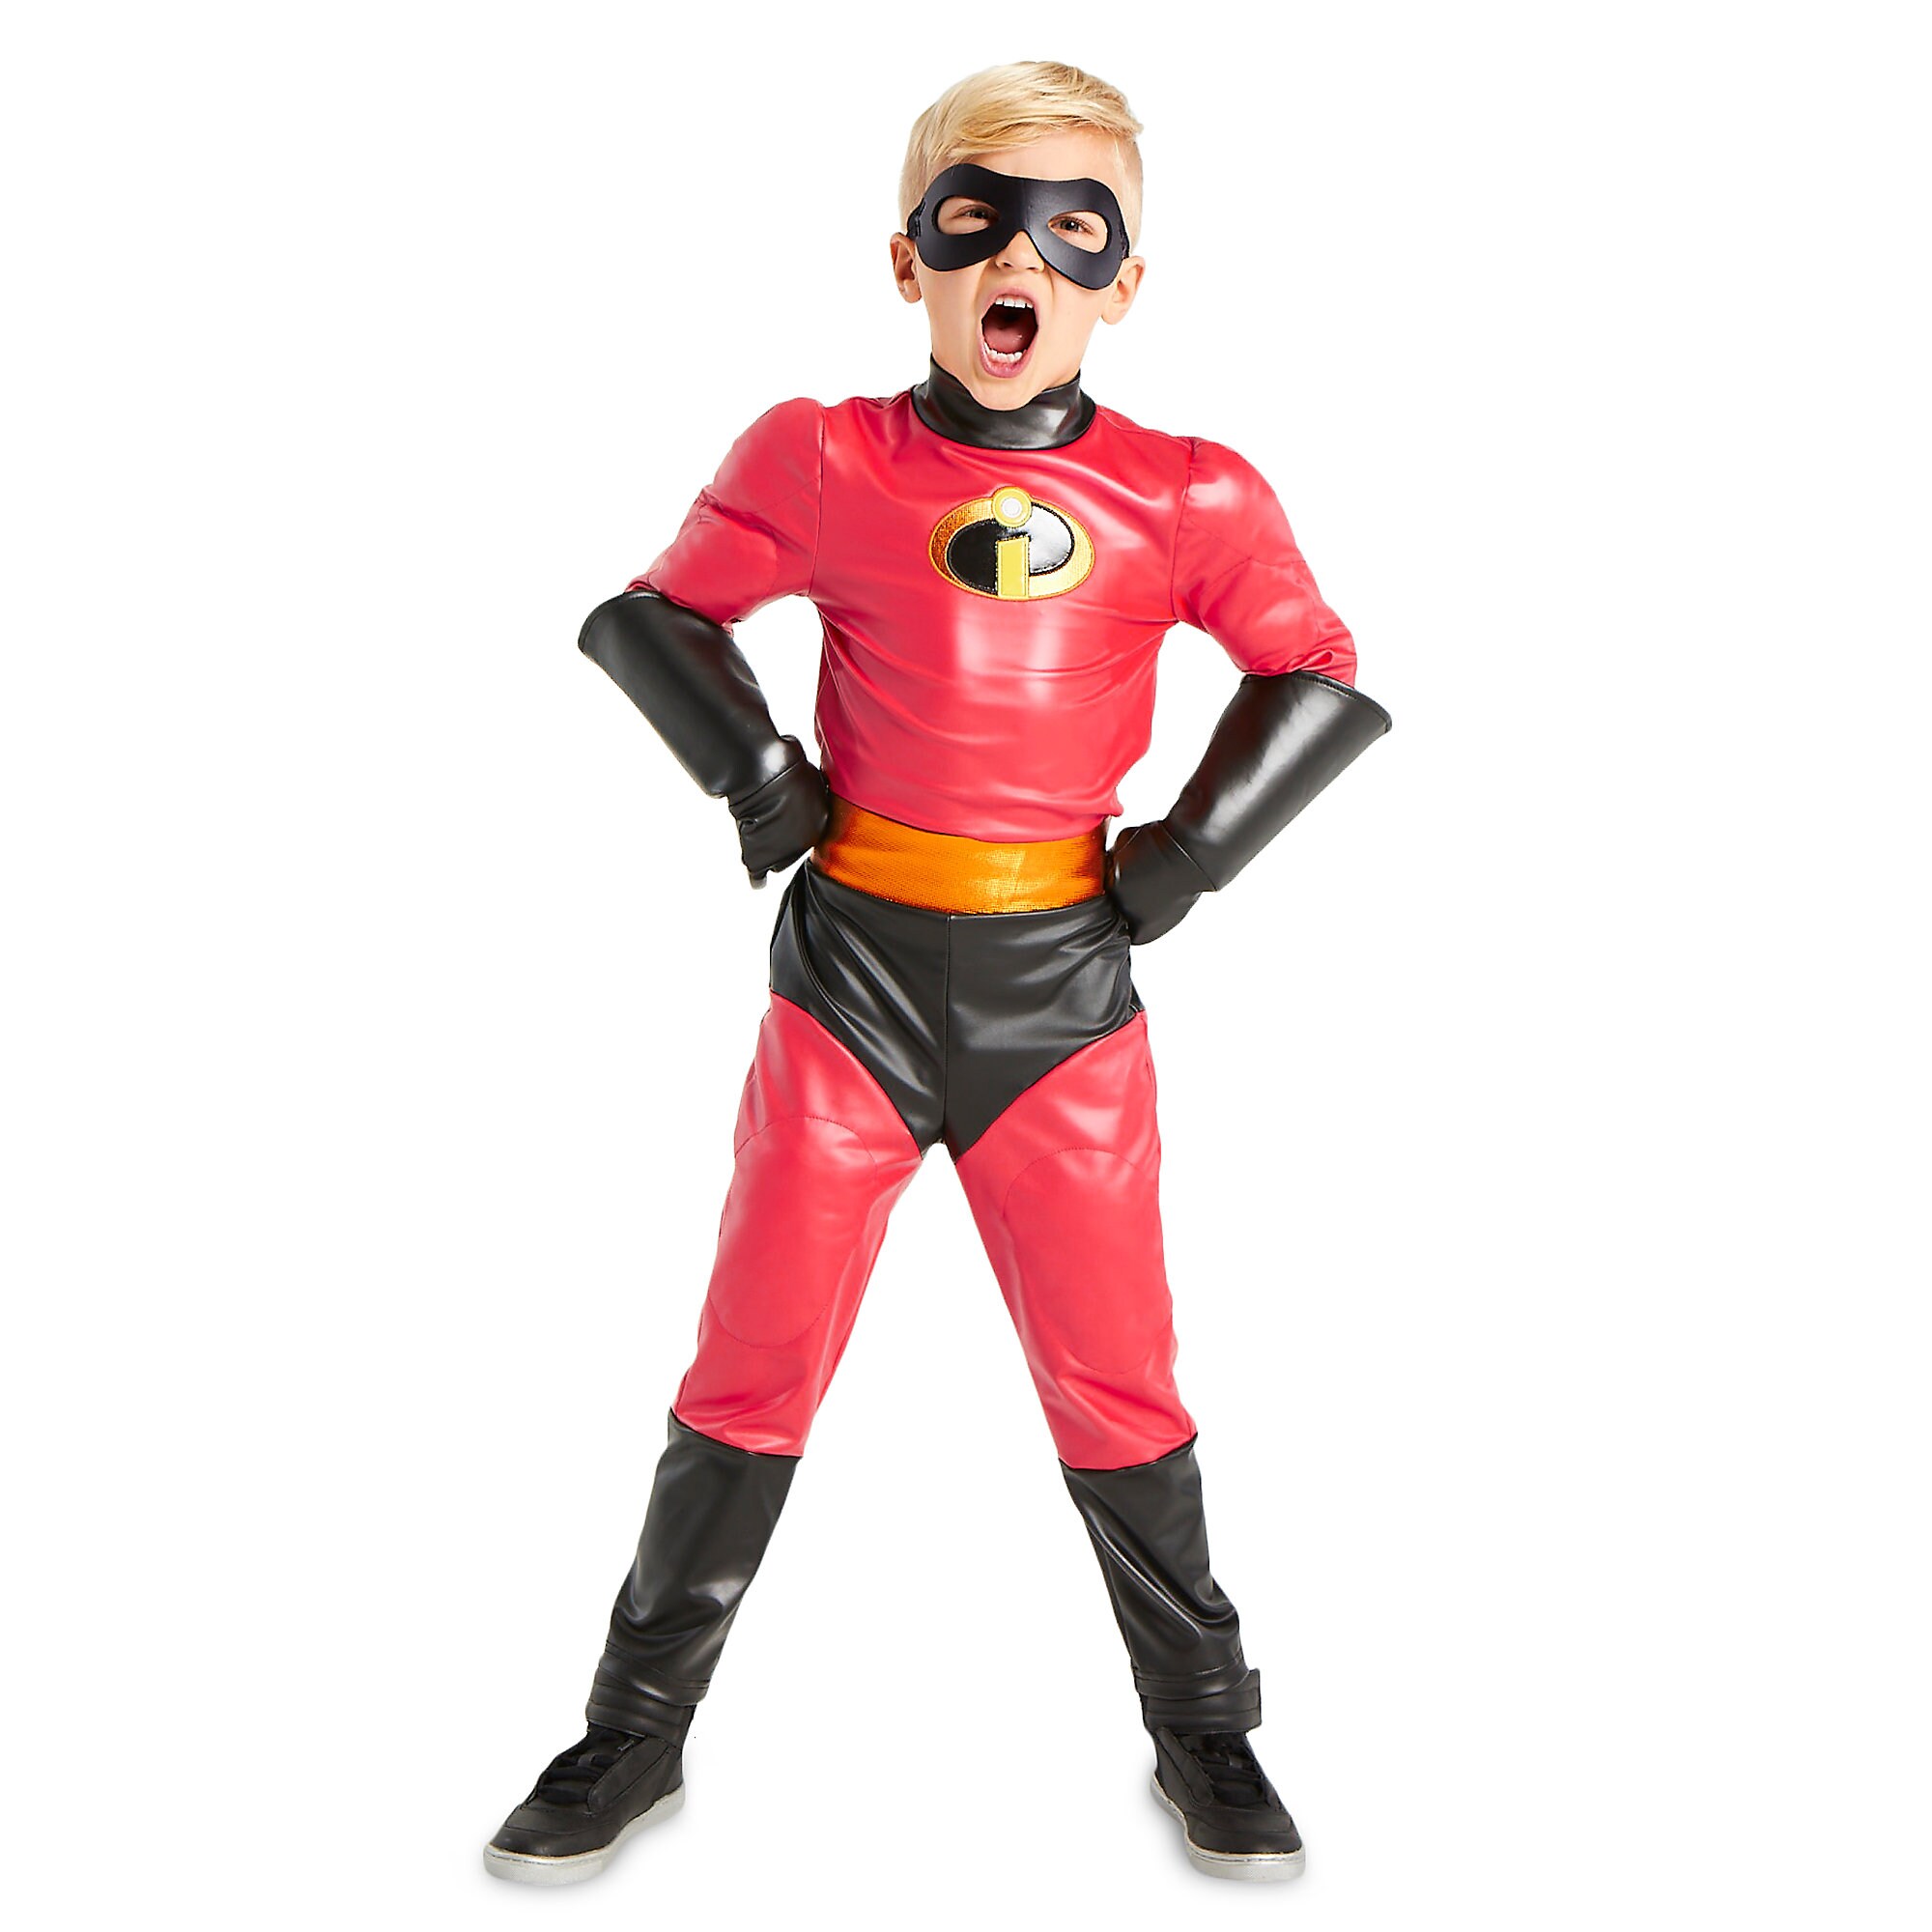 Dash Costume for Kids - Incredibles 2 is now available for purchase ...